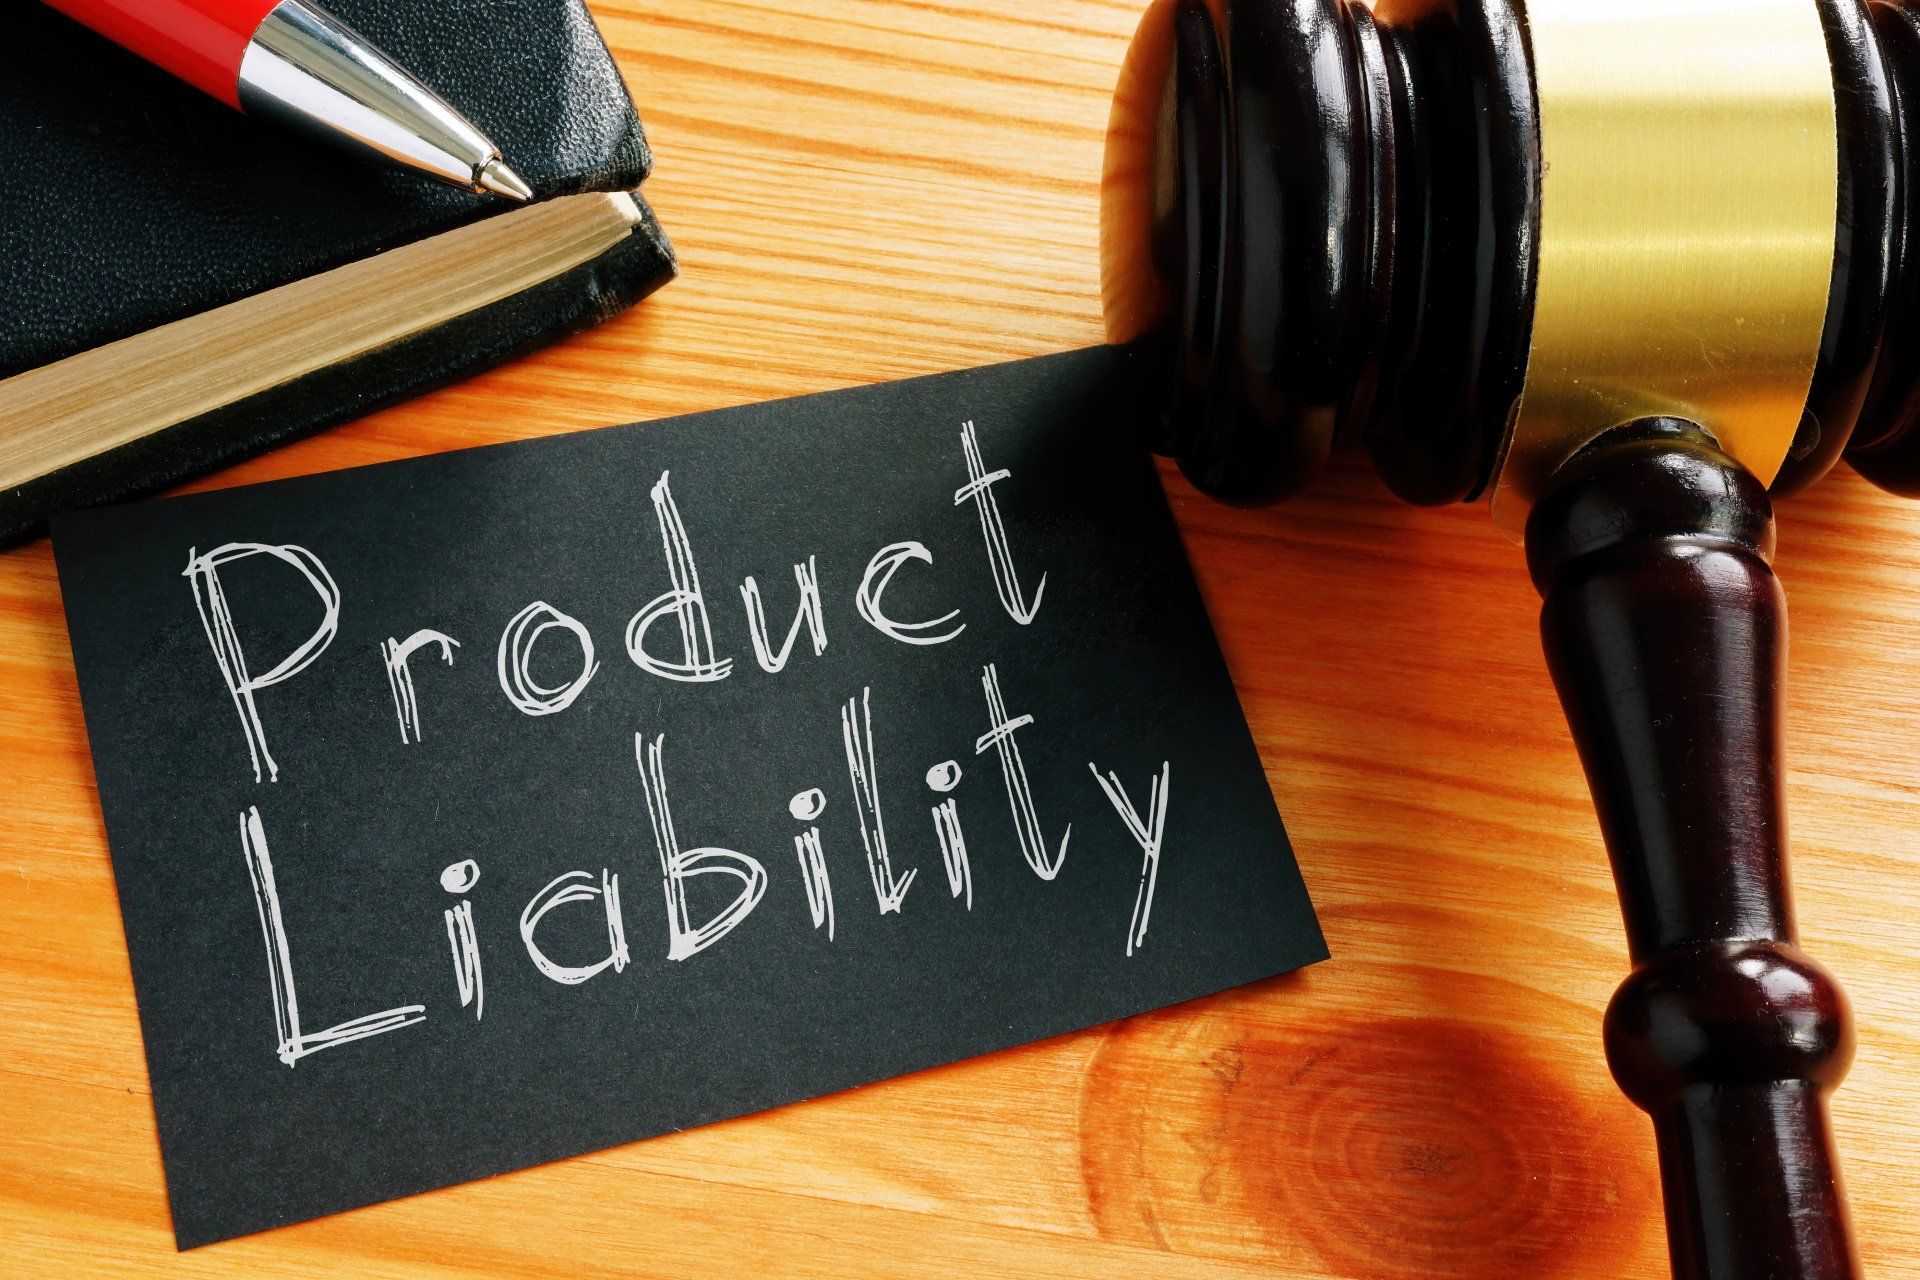 Product vs. Premises Liability Claims: What Are They and Who Can Be Held Responsible?